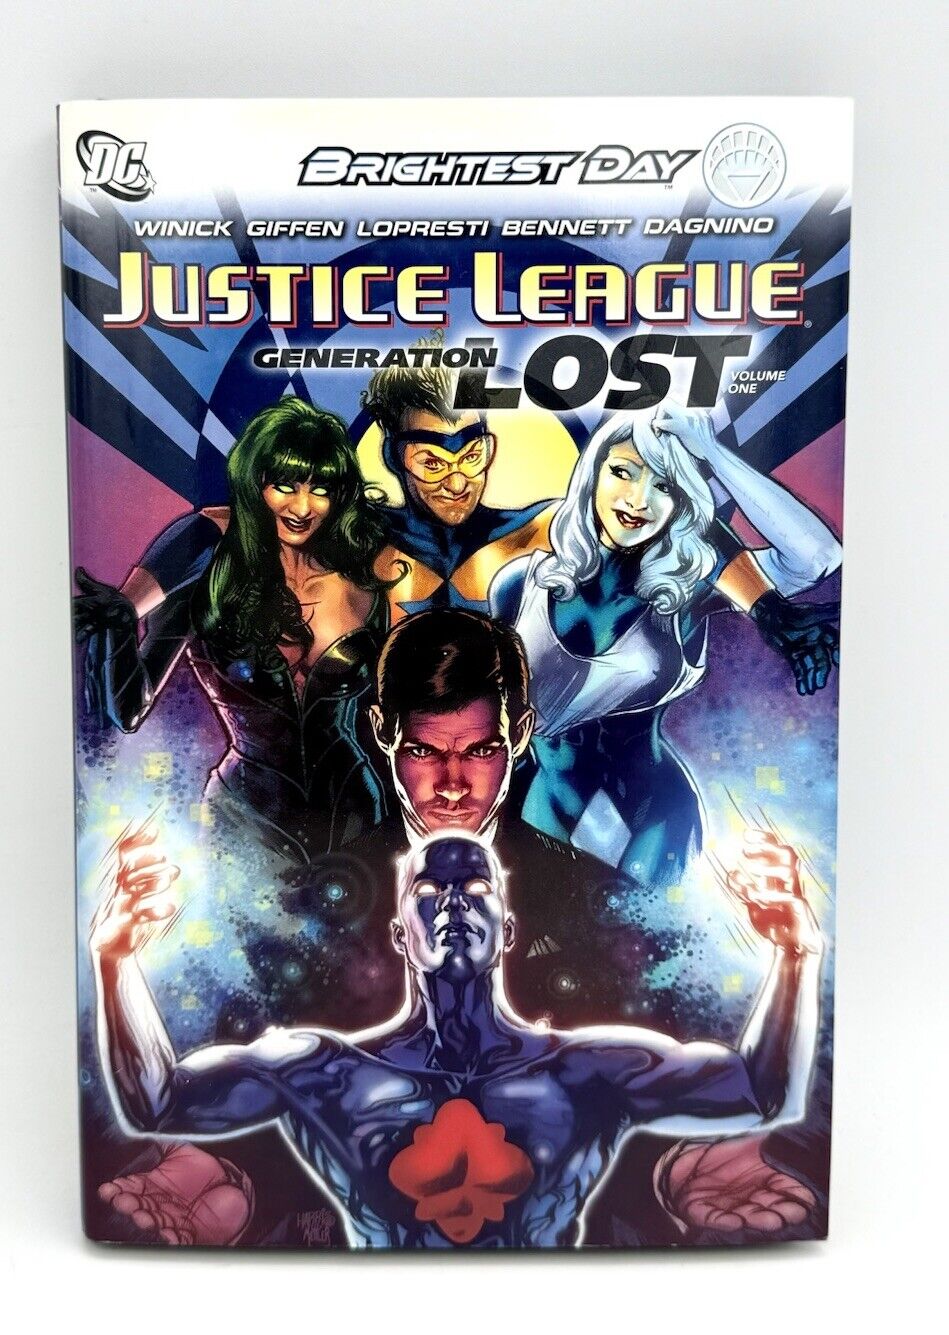 Justice League Generation Lost Volume 1 Brightest Day Hardcover DC Comics